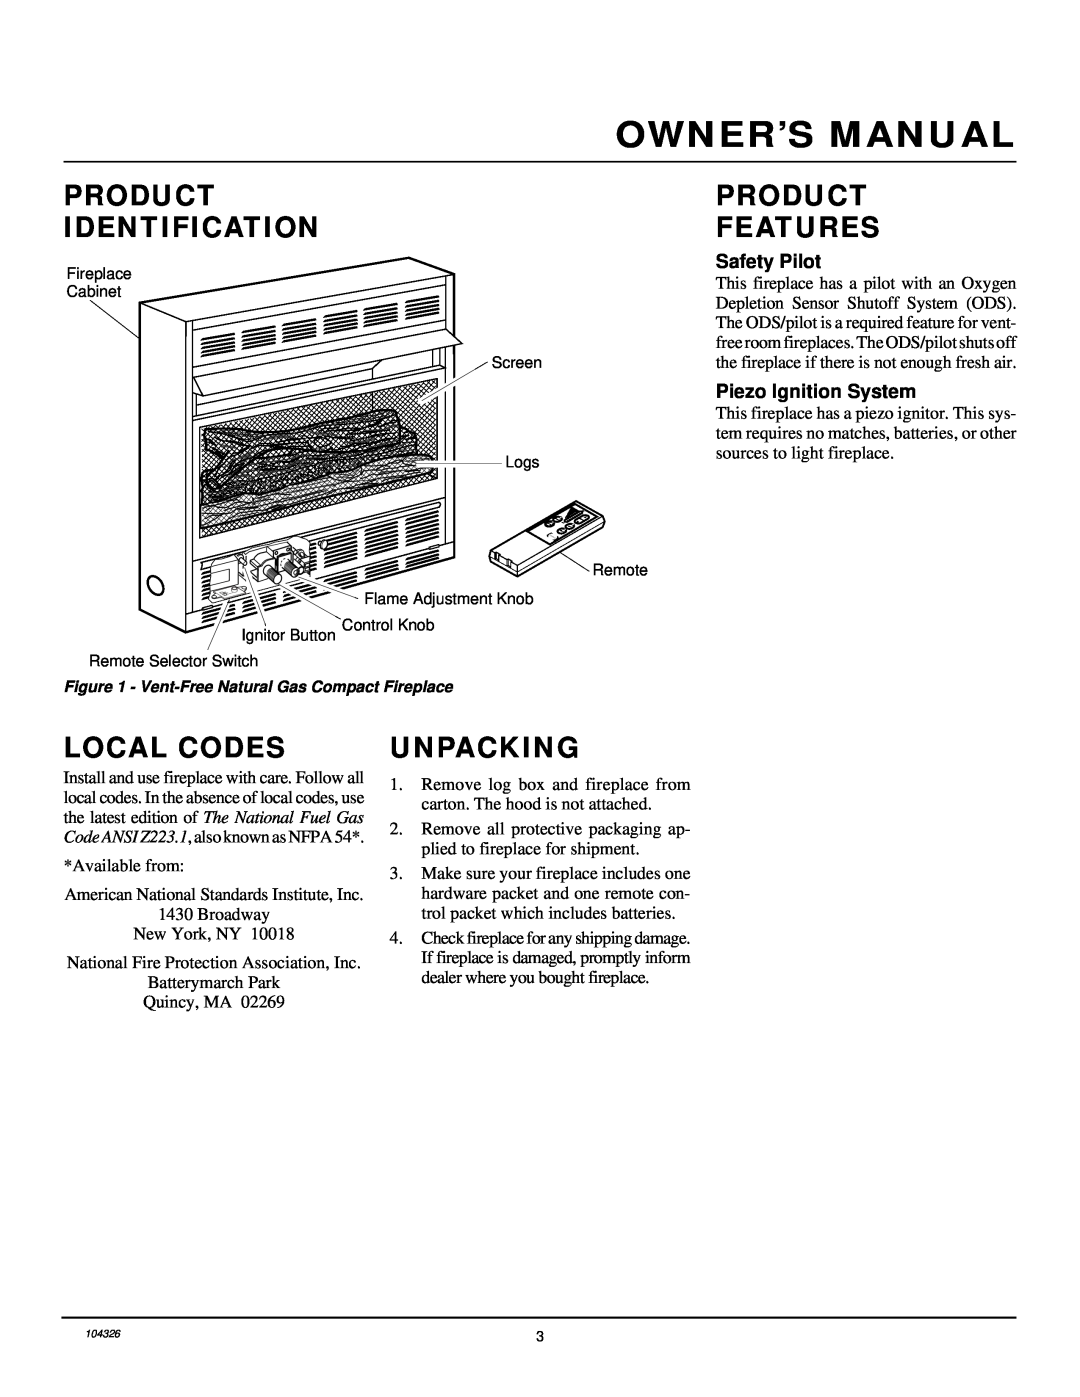 Desa CGCF26NR installation manual Product Identification, Product Features, Local Codes, Unpacking 